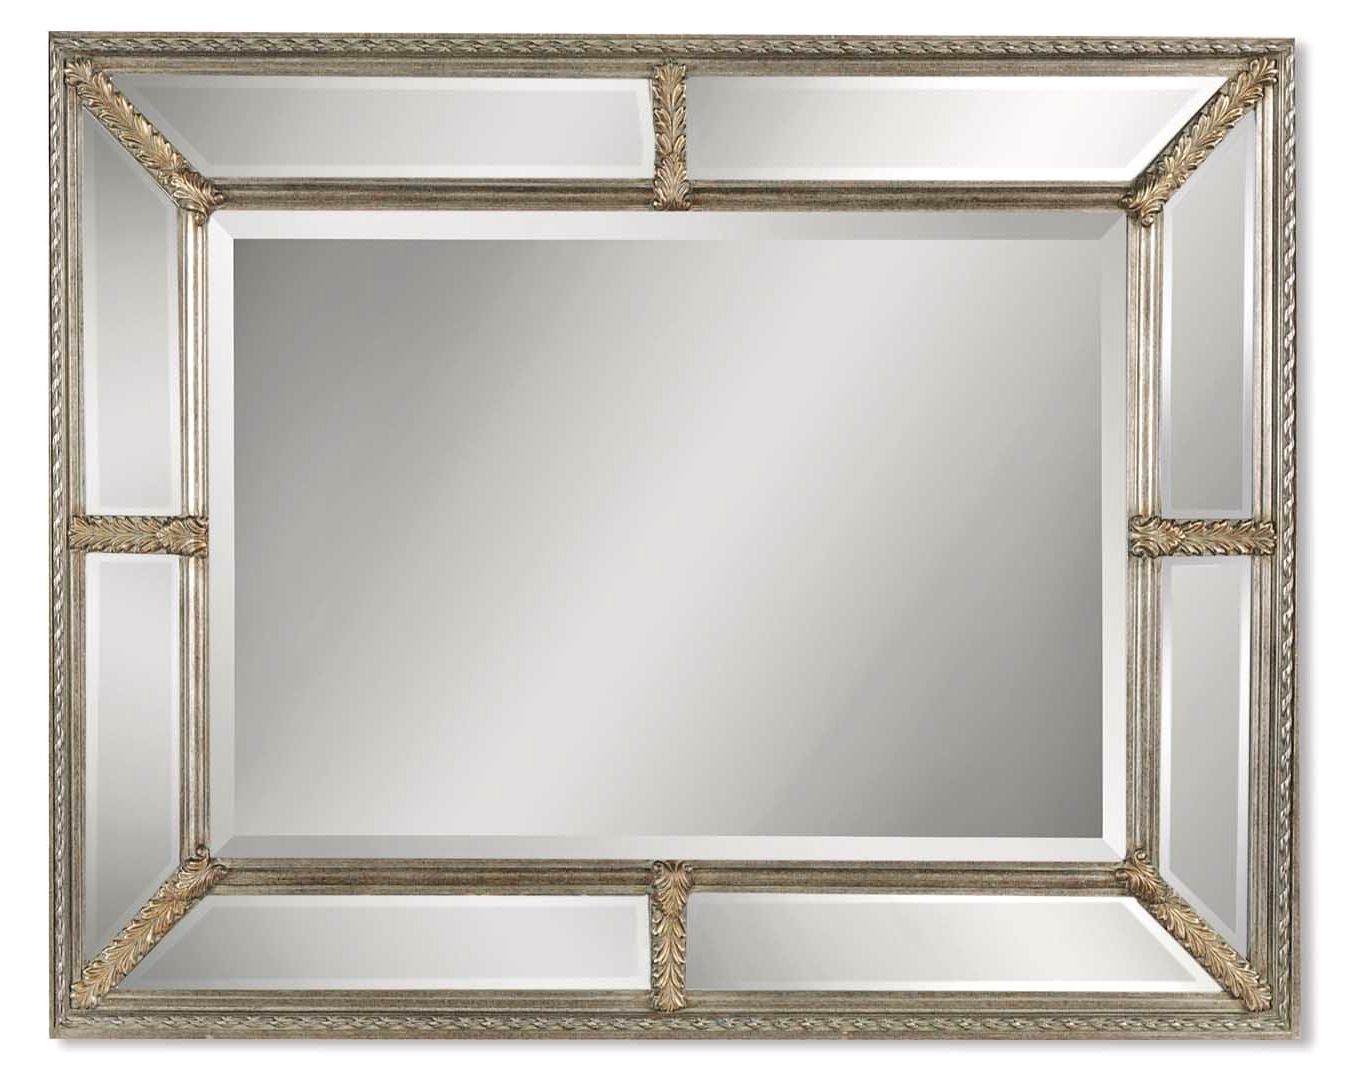 Widely Used Lucinda Antique Beveled Mirror W/ Decorative Silver & Gold Leaf Frame With Glam Silver Leaf Beaded Wall Mirrors (View 15 of 15)